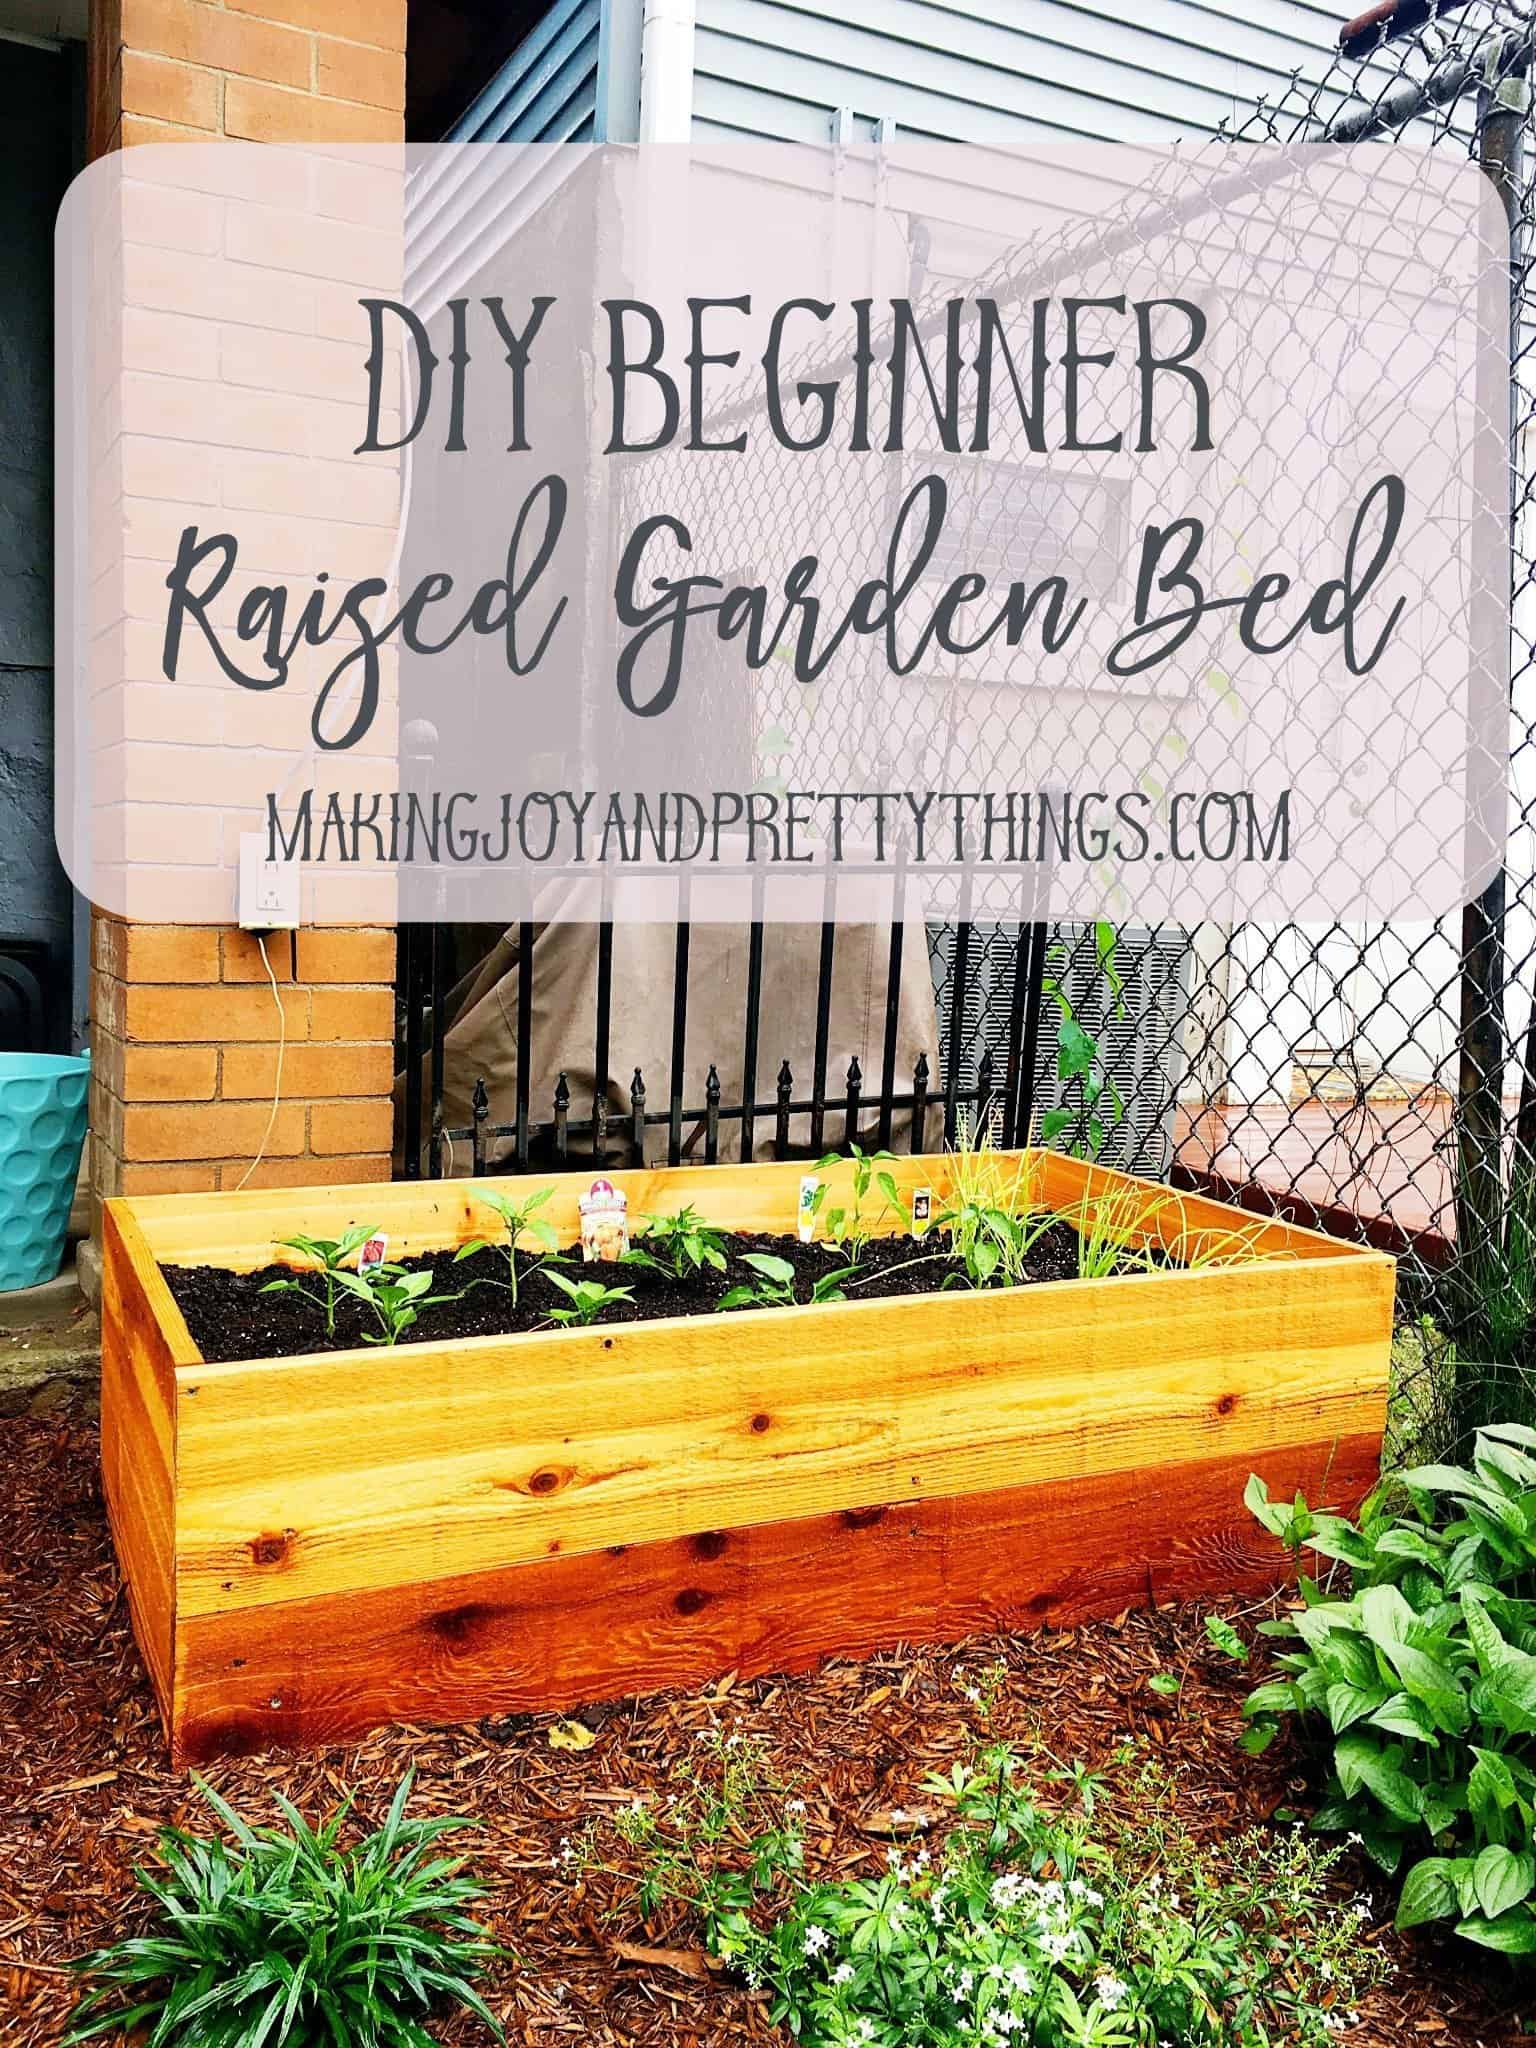 Cedar raise garden beds are a great way to add layers do your garden, easier to weed, and naturally have good drainage